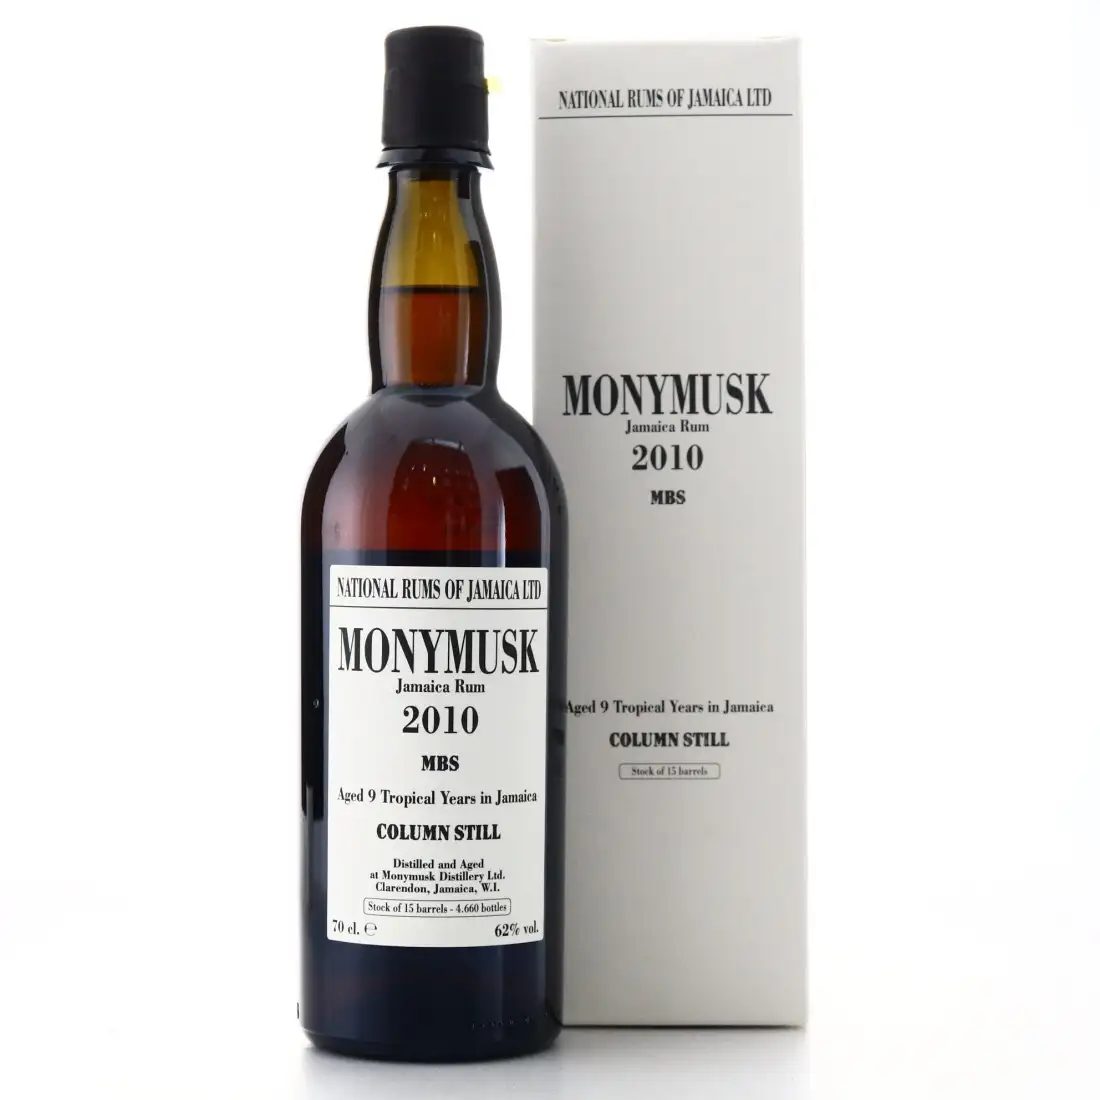 Image of the front of the bottle of the rum Monymusk MBS